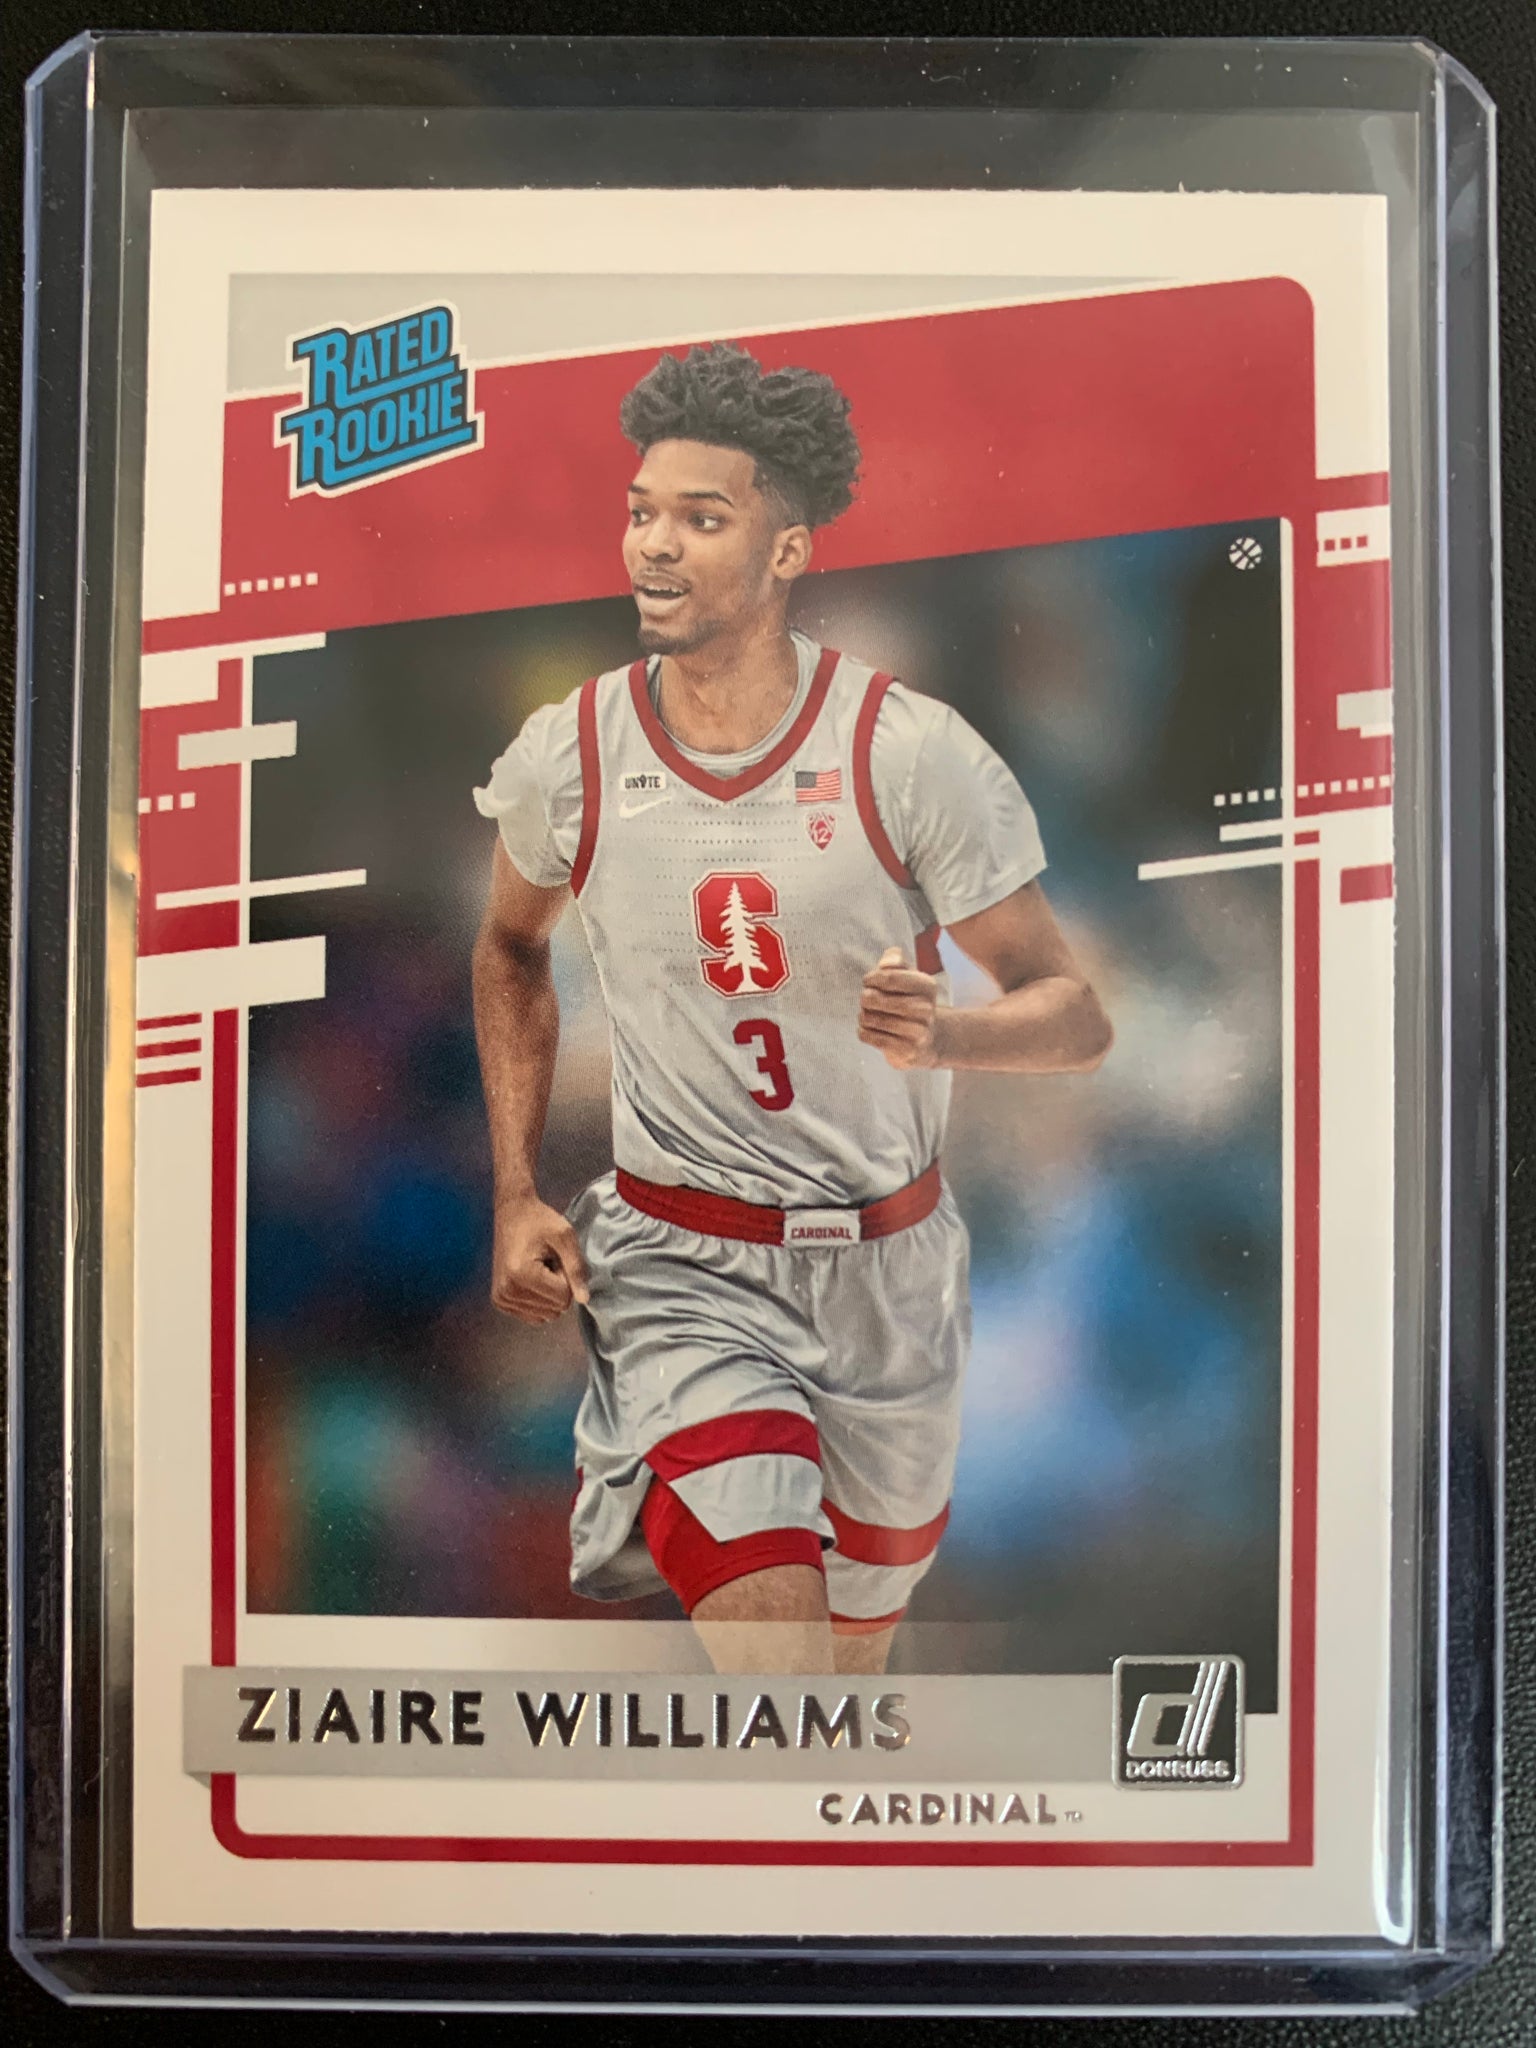 2021 PANINI CHRONICLES DRAFT PICKS BASKETBALL #41 NEW ORLEANS PELICANS - ZIAIRE WILLIAMS CHRONICLES DONRUSS RATED ROOKIE CARD